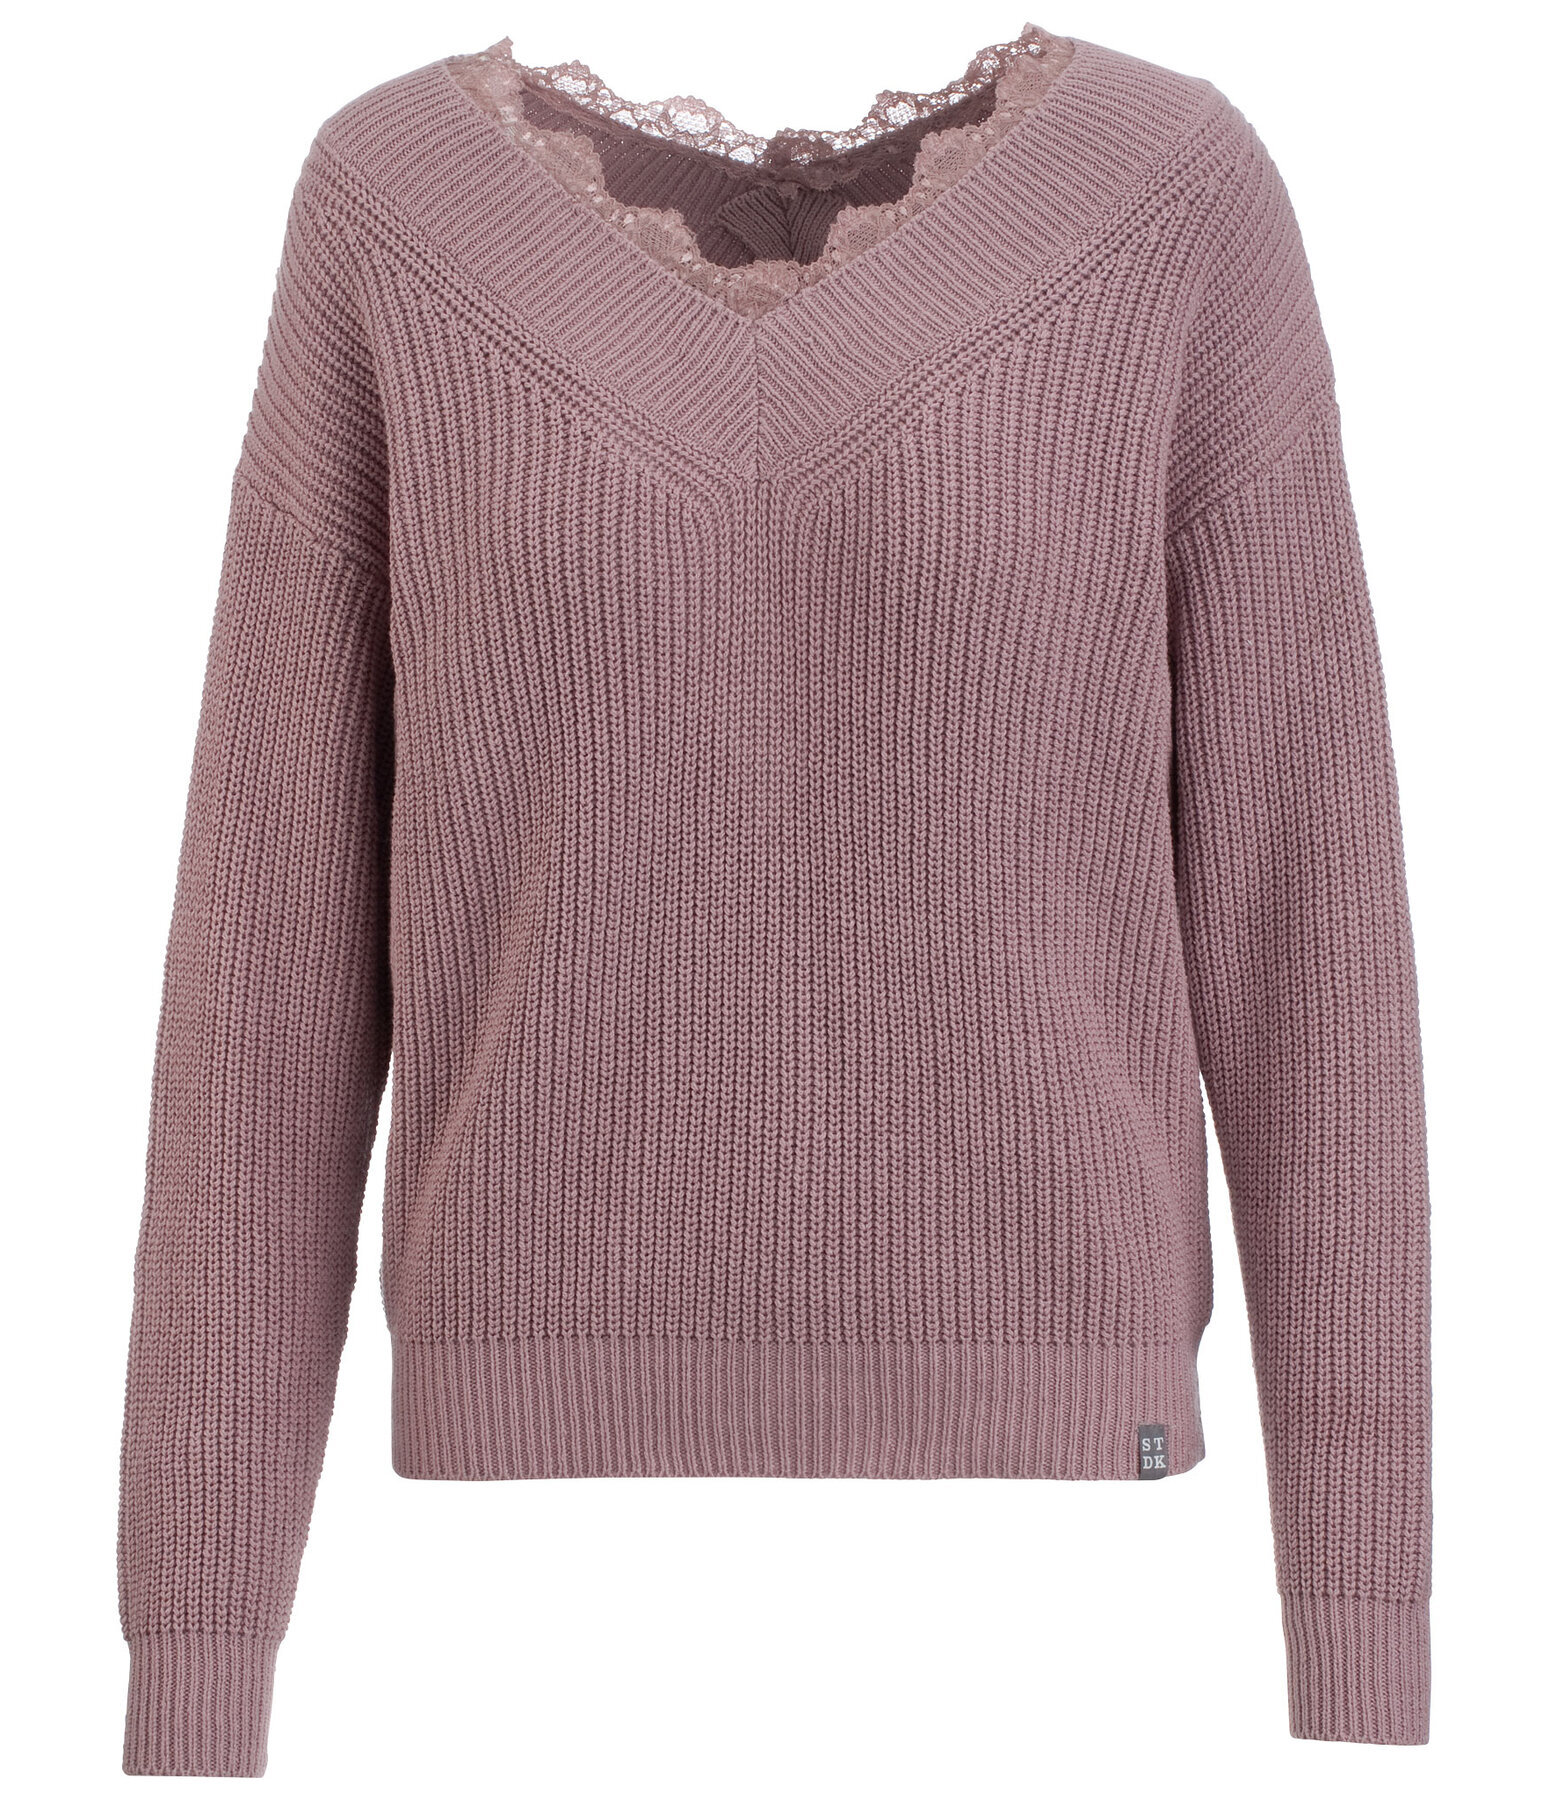 Pull-over en tricot  Lace